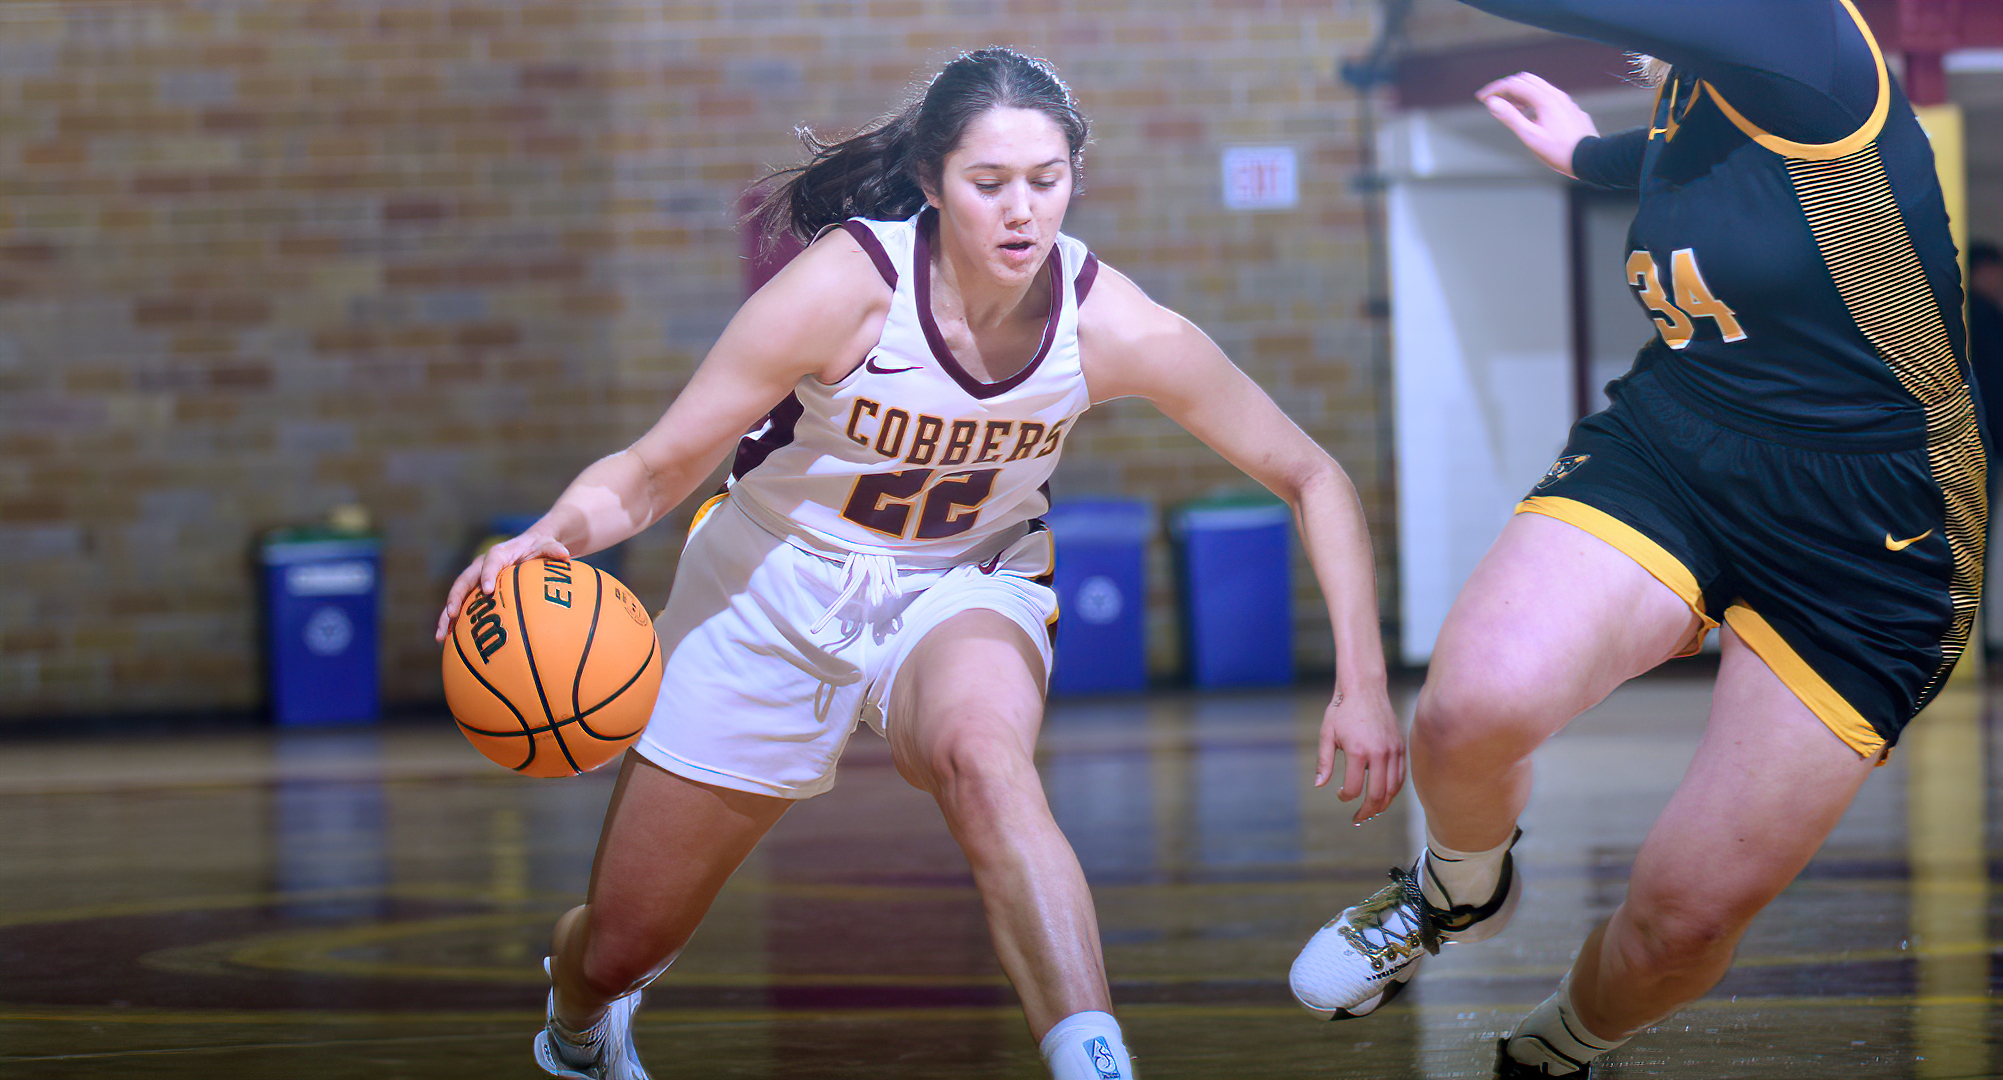 Sophomore Makayla Anderson had career-high totals in points and rebounds, and helped the Cobbers beat No.6-ranked Amherst in Las Vegas.